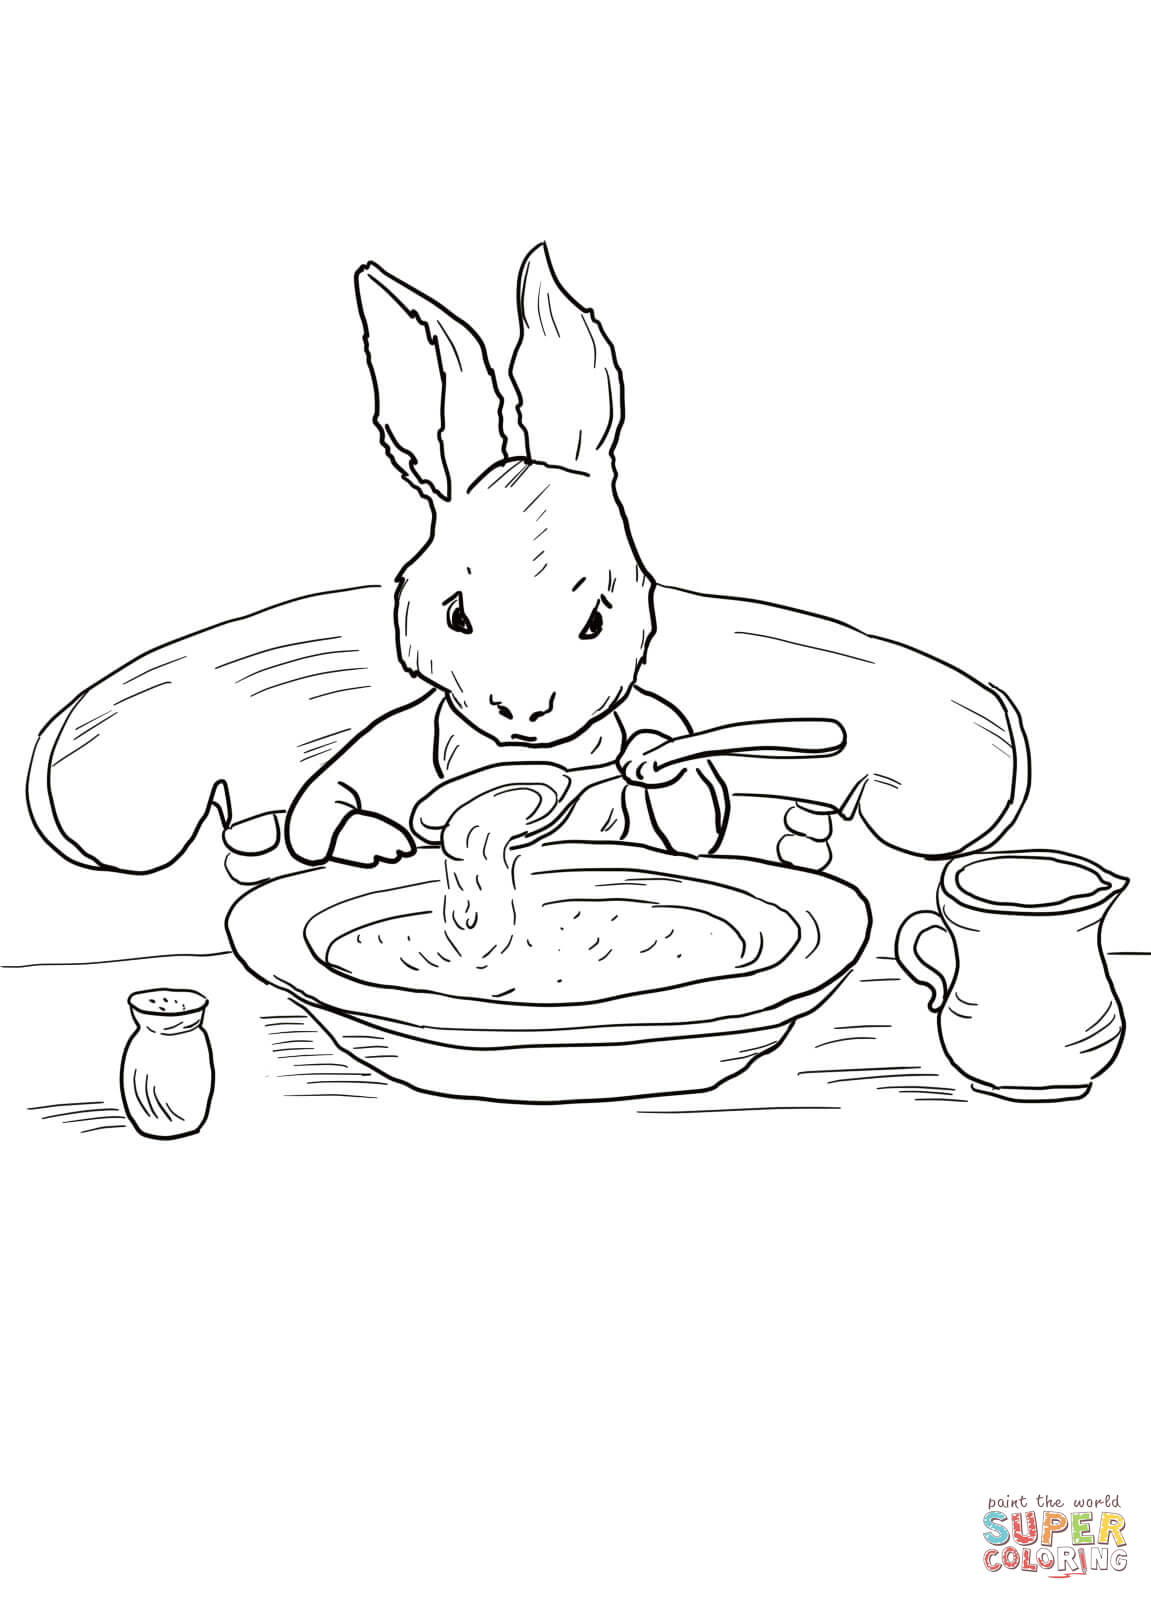 Free Printable Peter Rabbit Coloring Pages Coloring Ideas Coloring Ideas Peter Rabbit Pages Free At Home Page